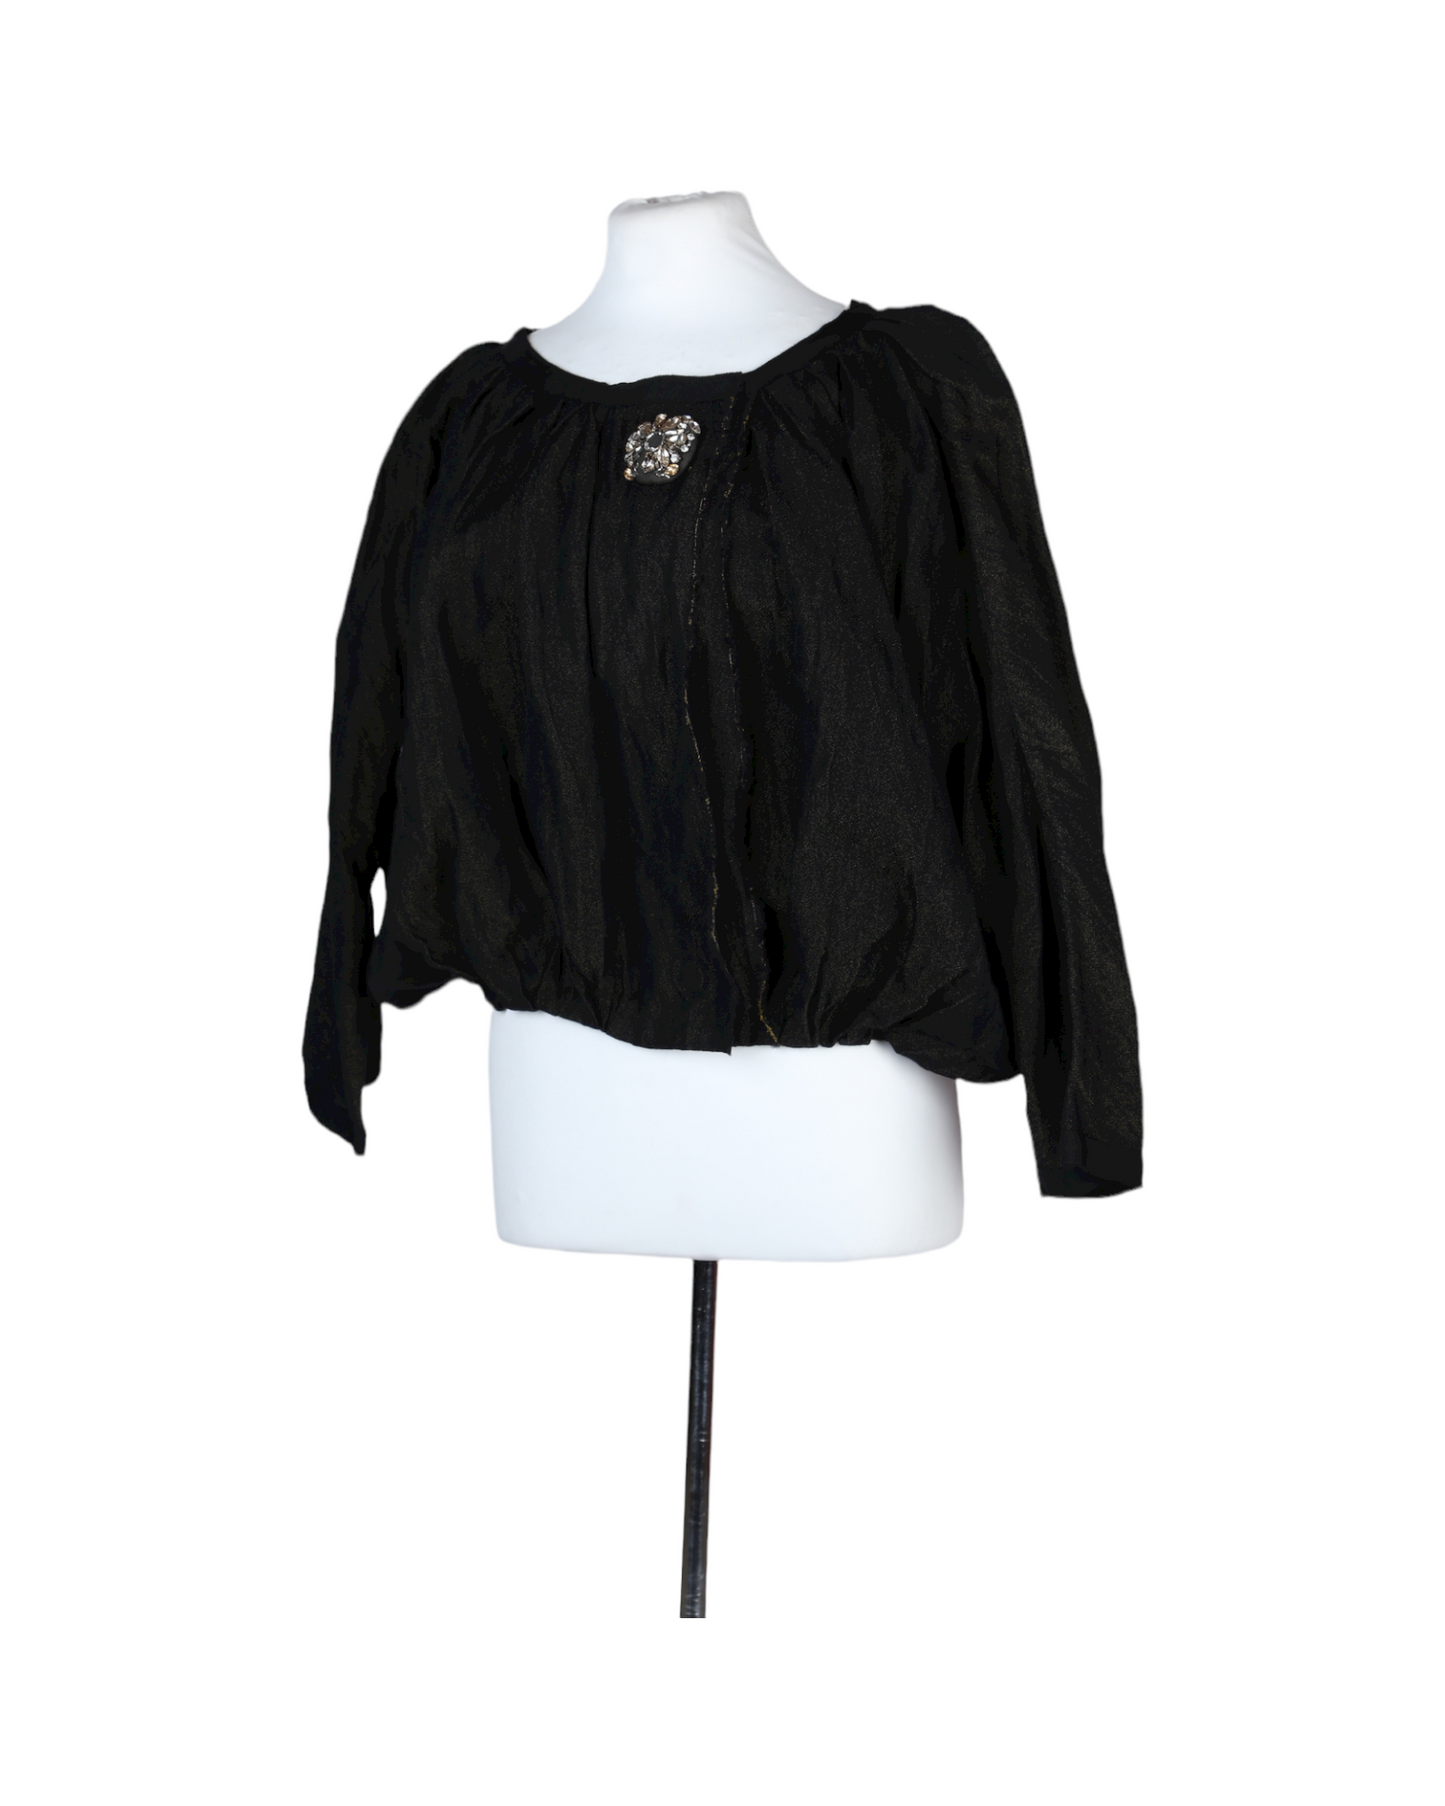 Lanvin Black and gold blouse